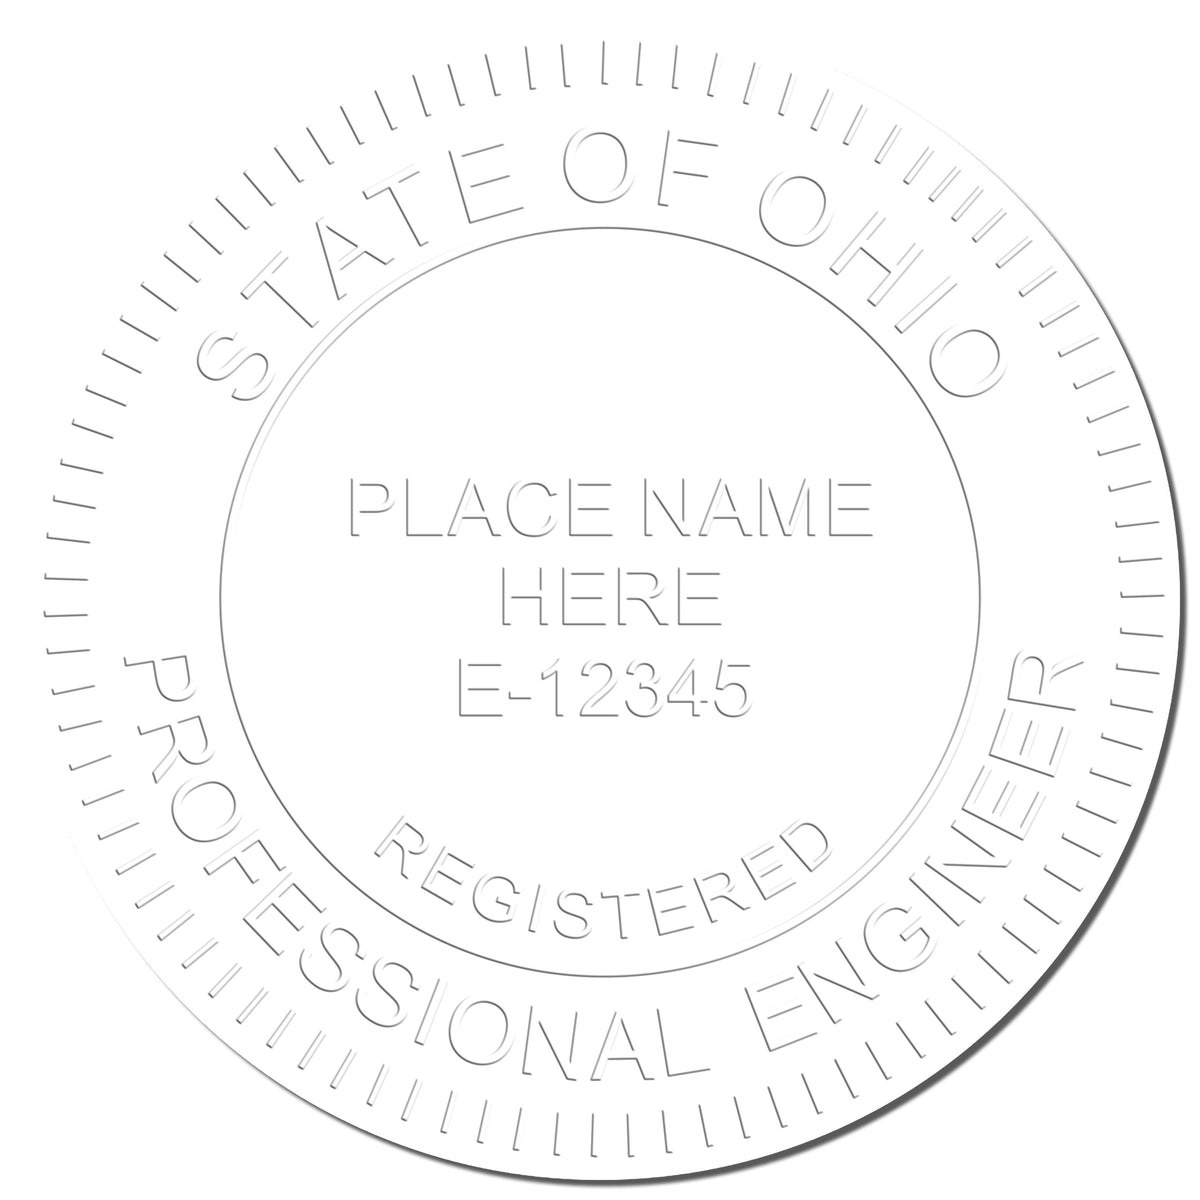 This paper is stamped with a sample imprint of the Gift Ohio Engineer Seal, signifying its quality and reliability.